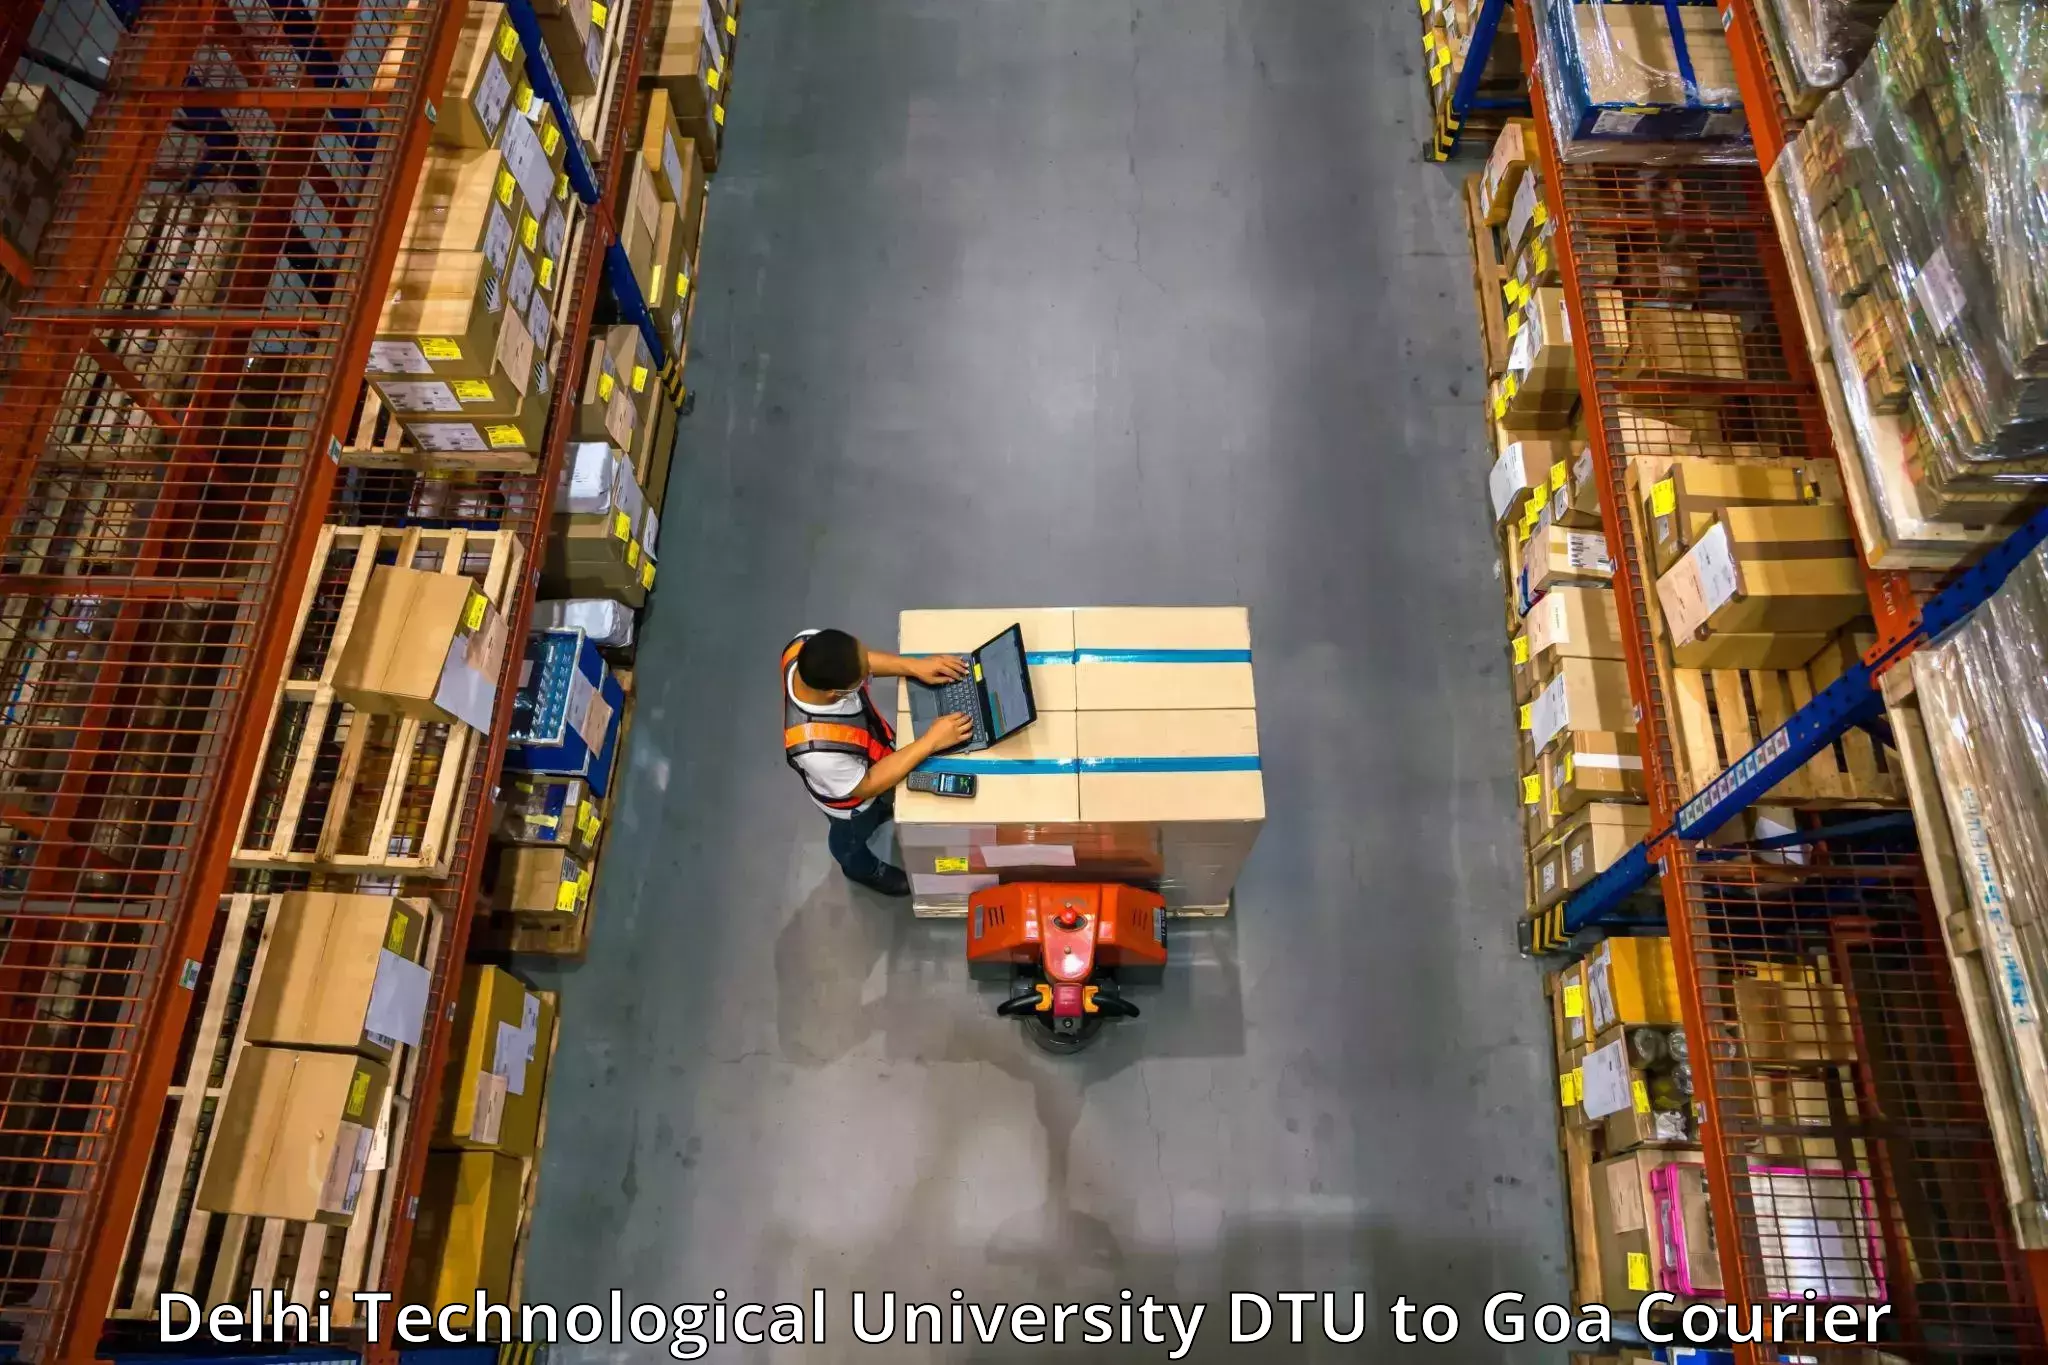 Packing and moving services in Delhi Technological University DTU to Goa